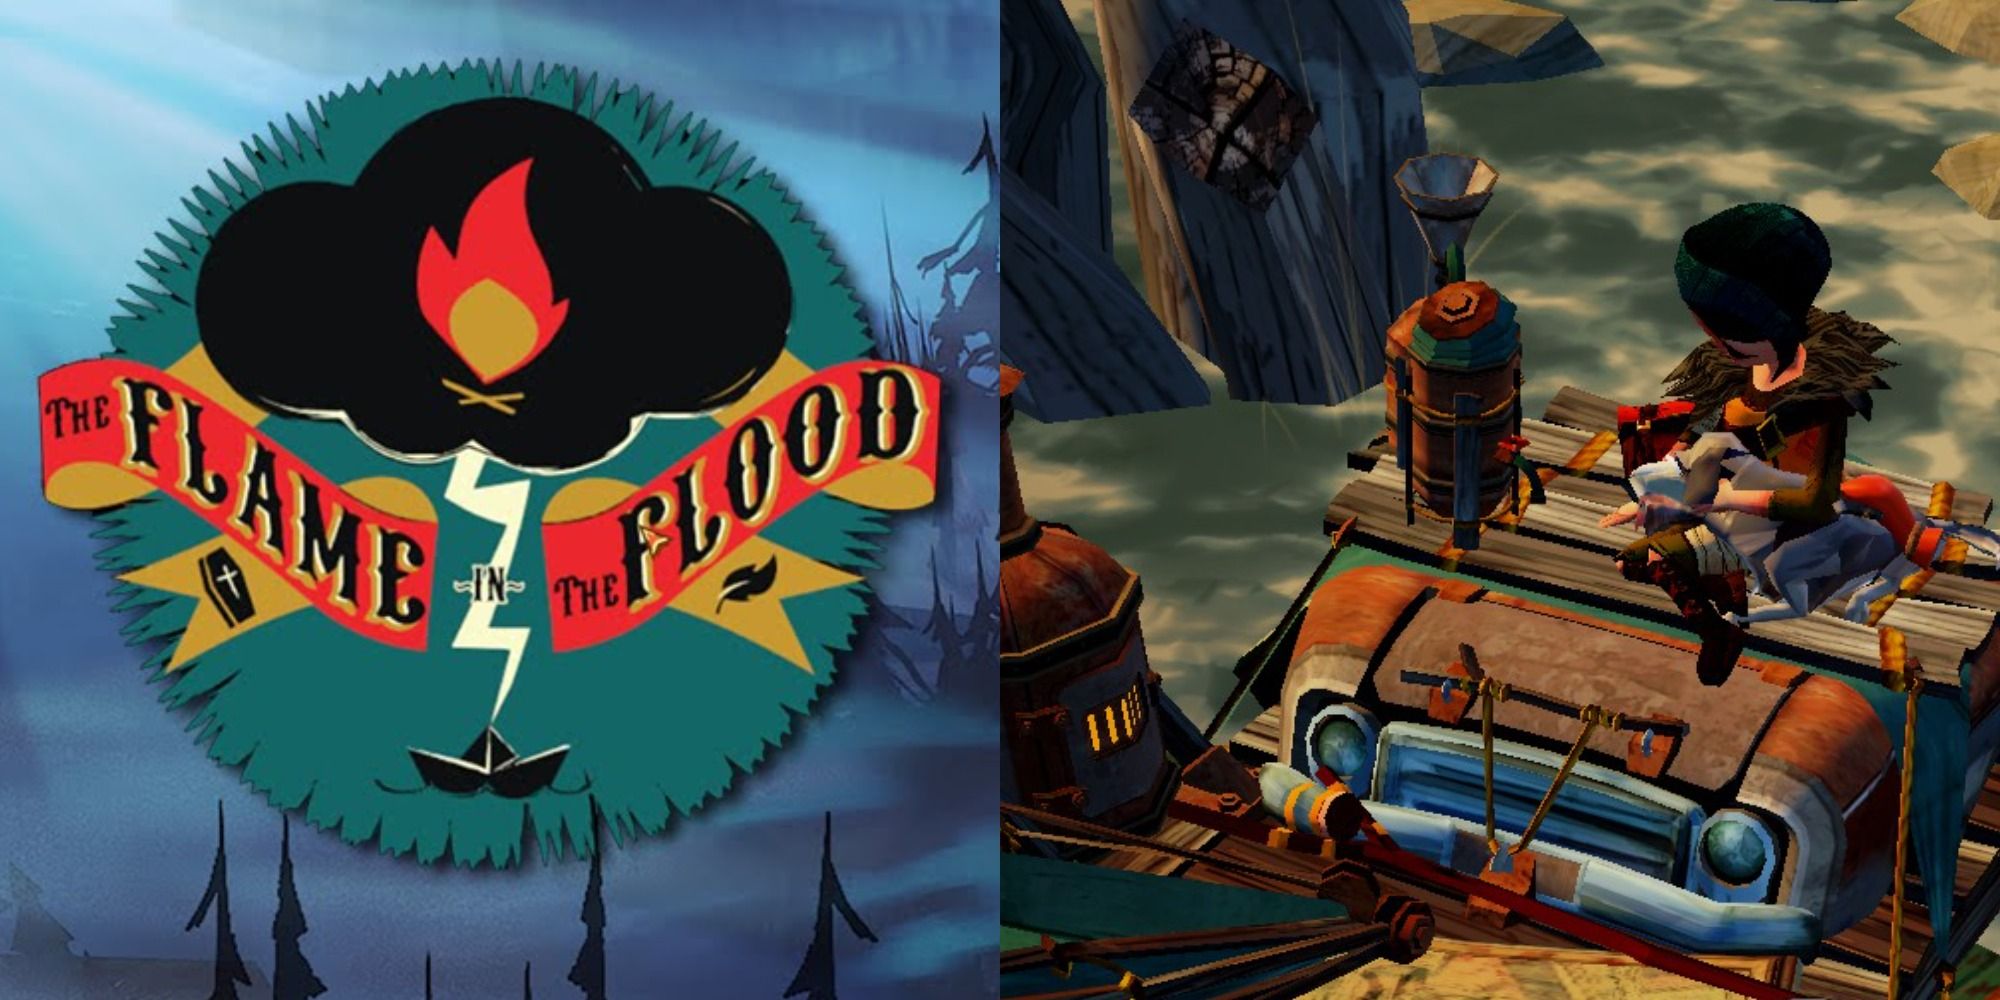 Raft and Flame in the Flood cover